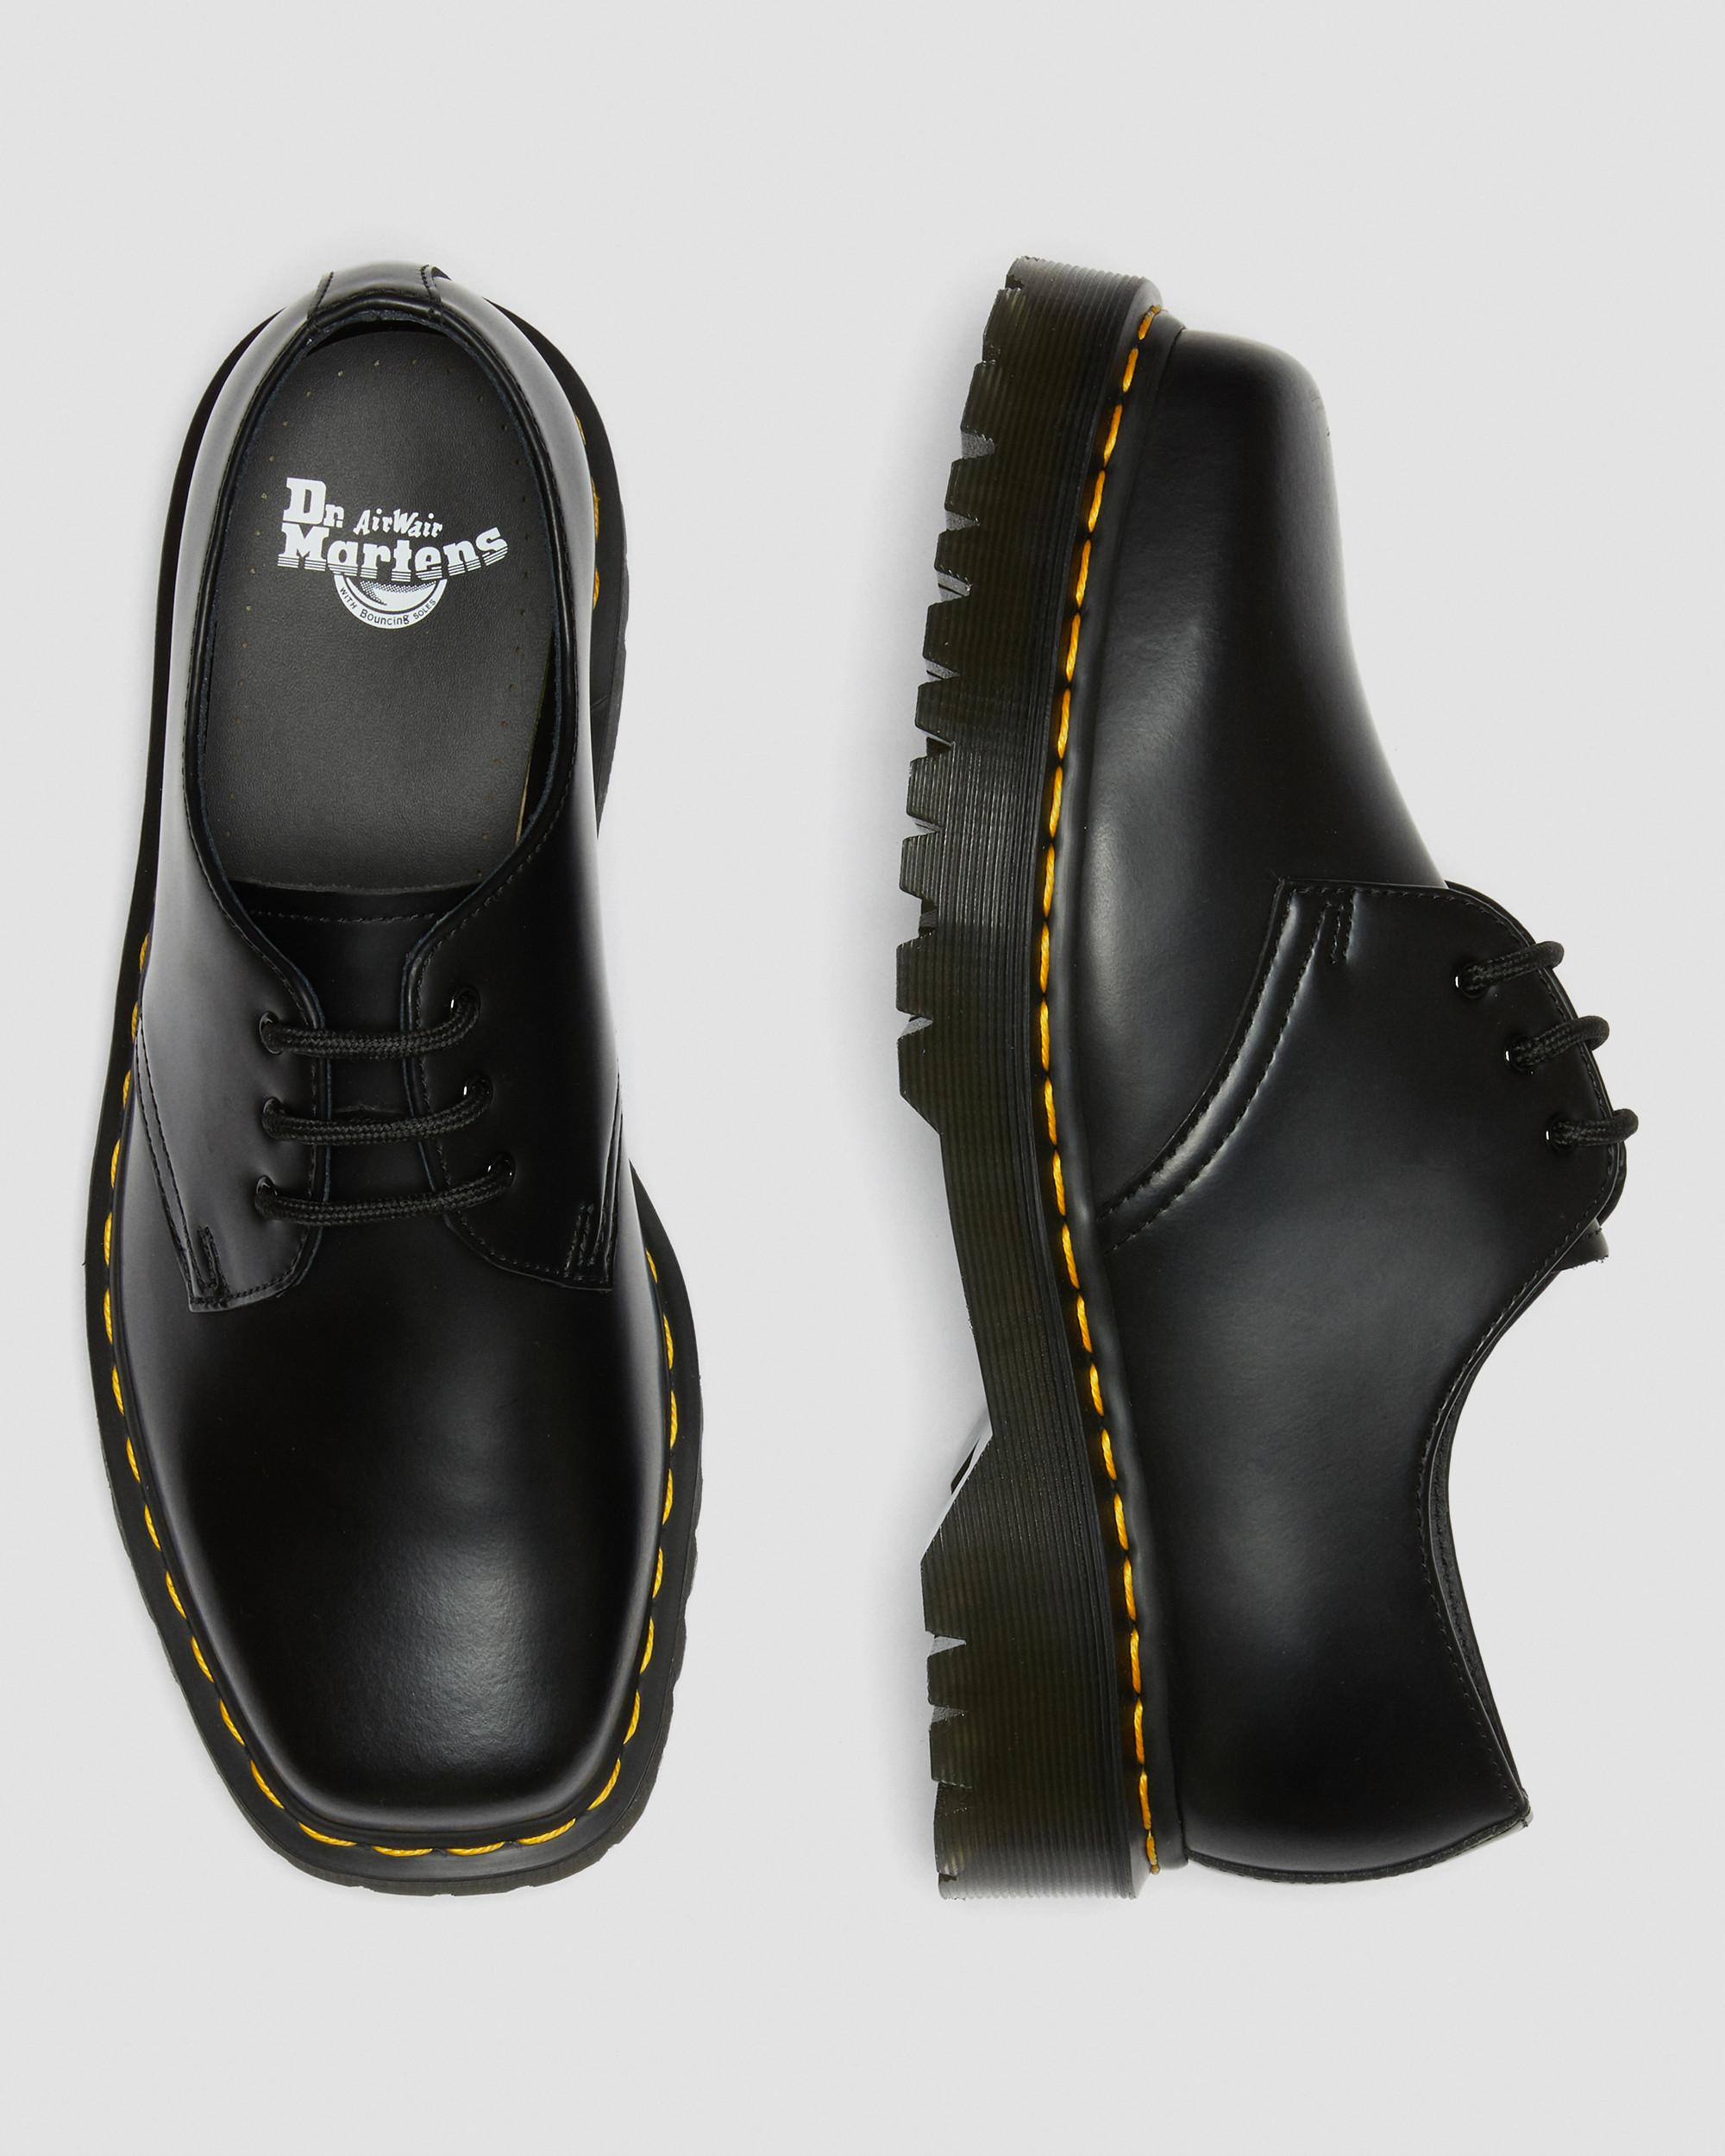 DR MARTENS 1461 Bex Squared Toe Leather Oxford Shoes